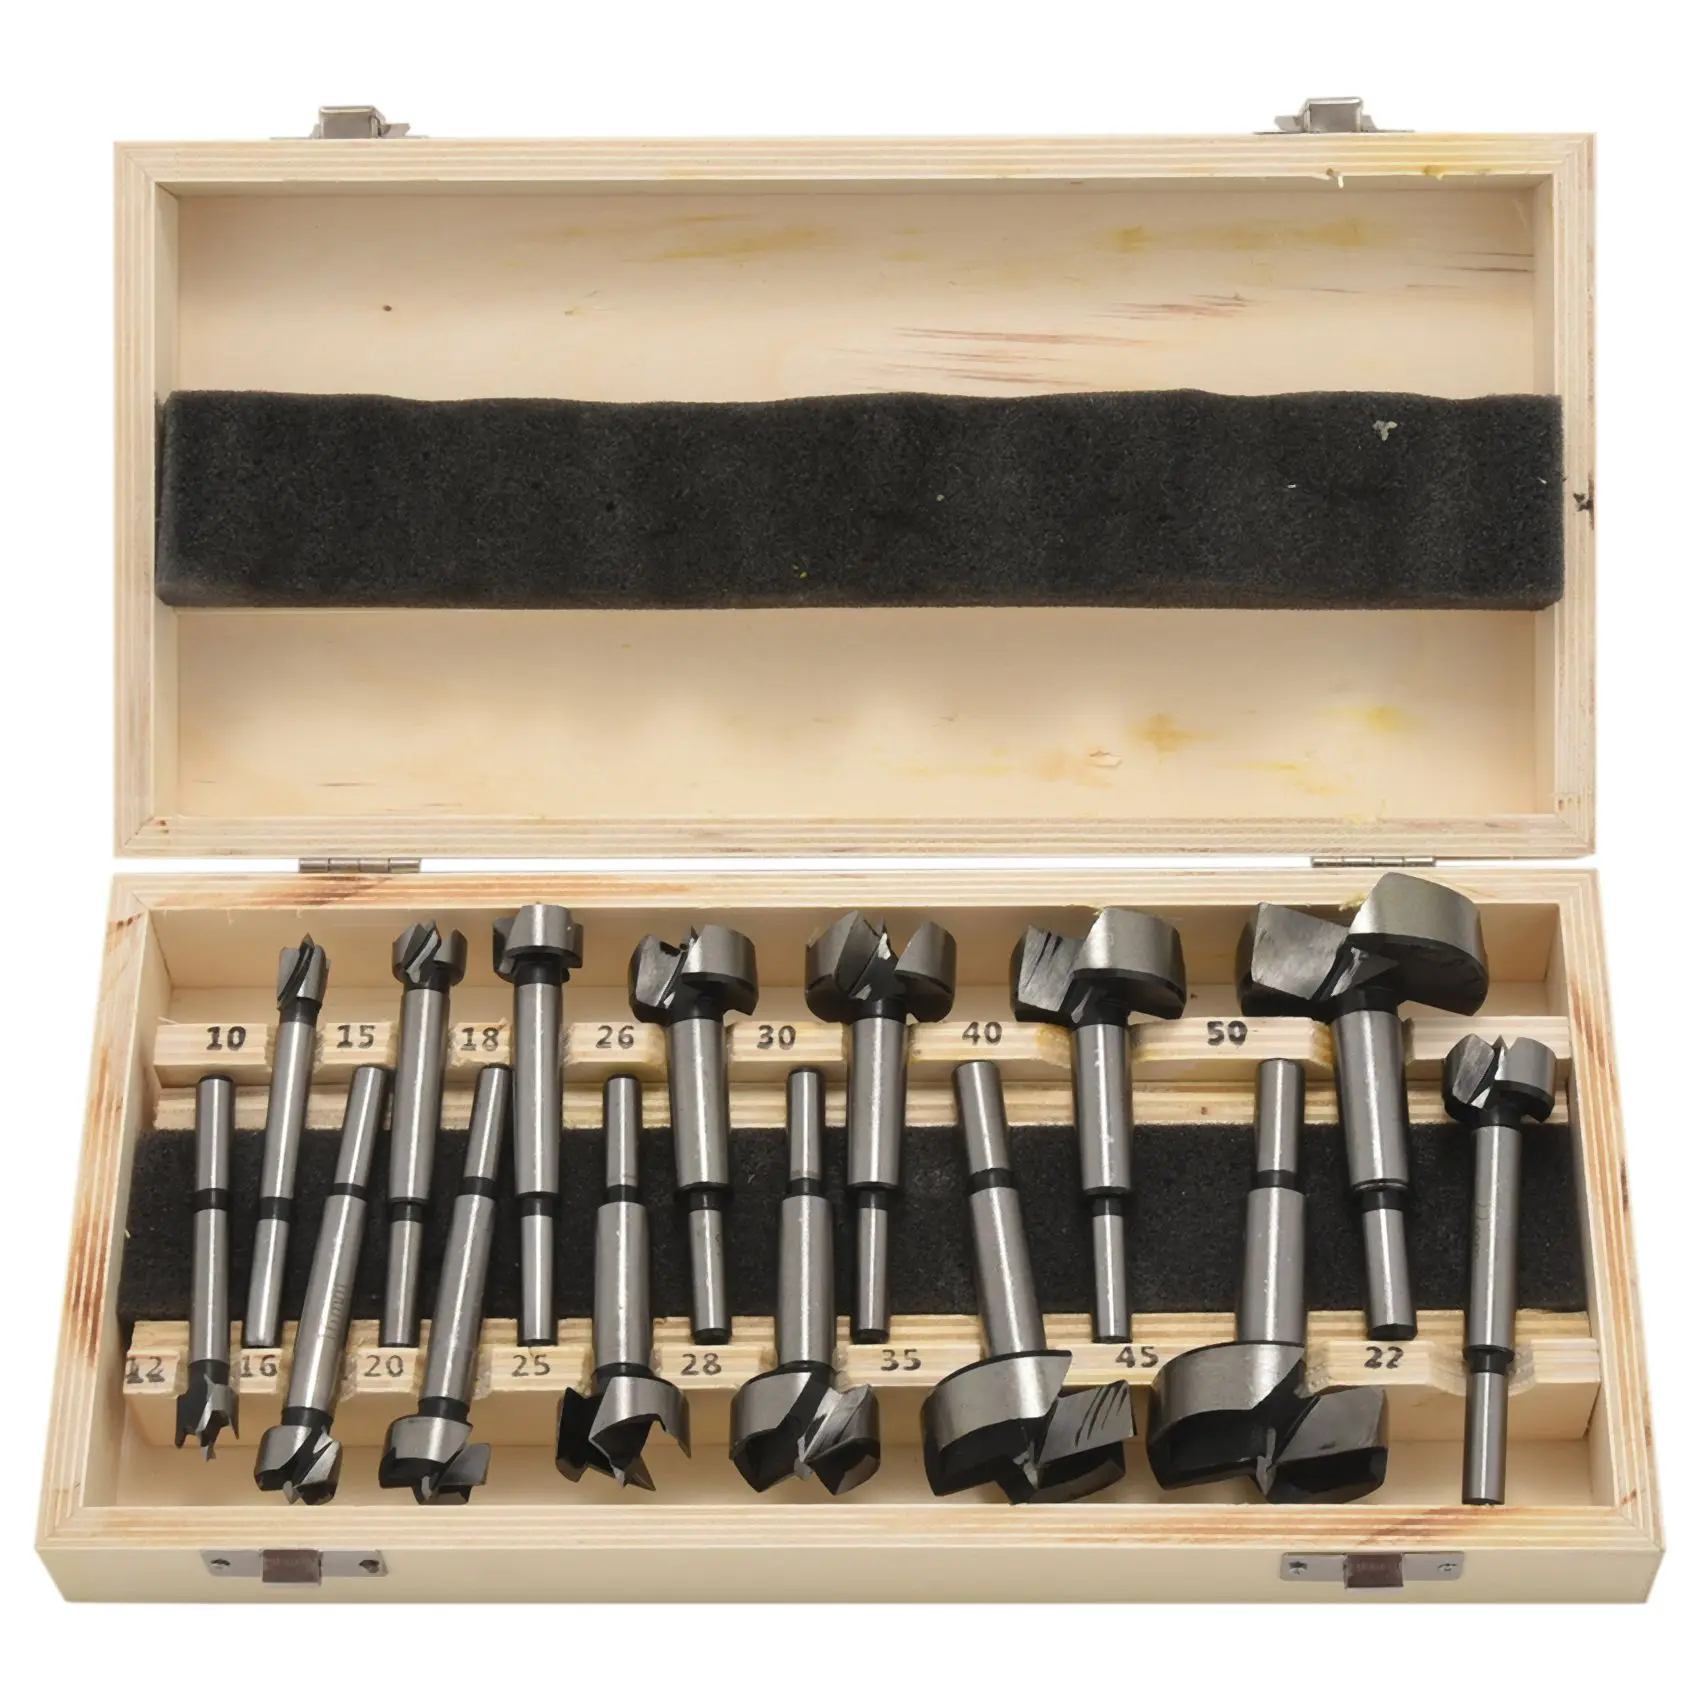 forstner-drill-bit-set-15-pcs-10mm-50mm-woodworking-hole-saw-drilling-cutting-tool-kits-for-woodworking-furniture-door-hinge